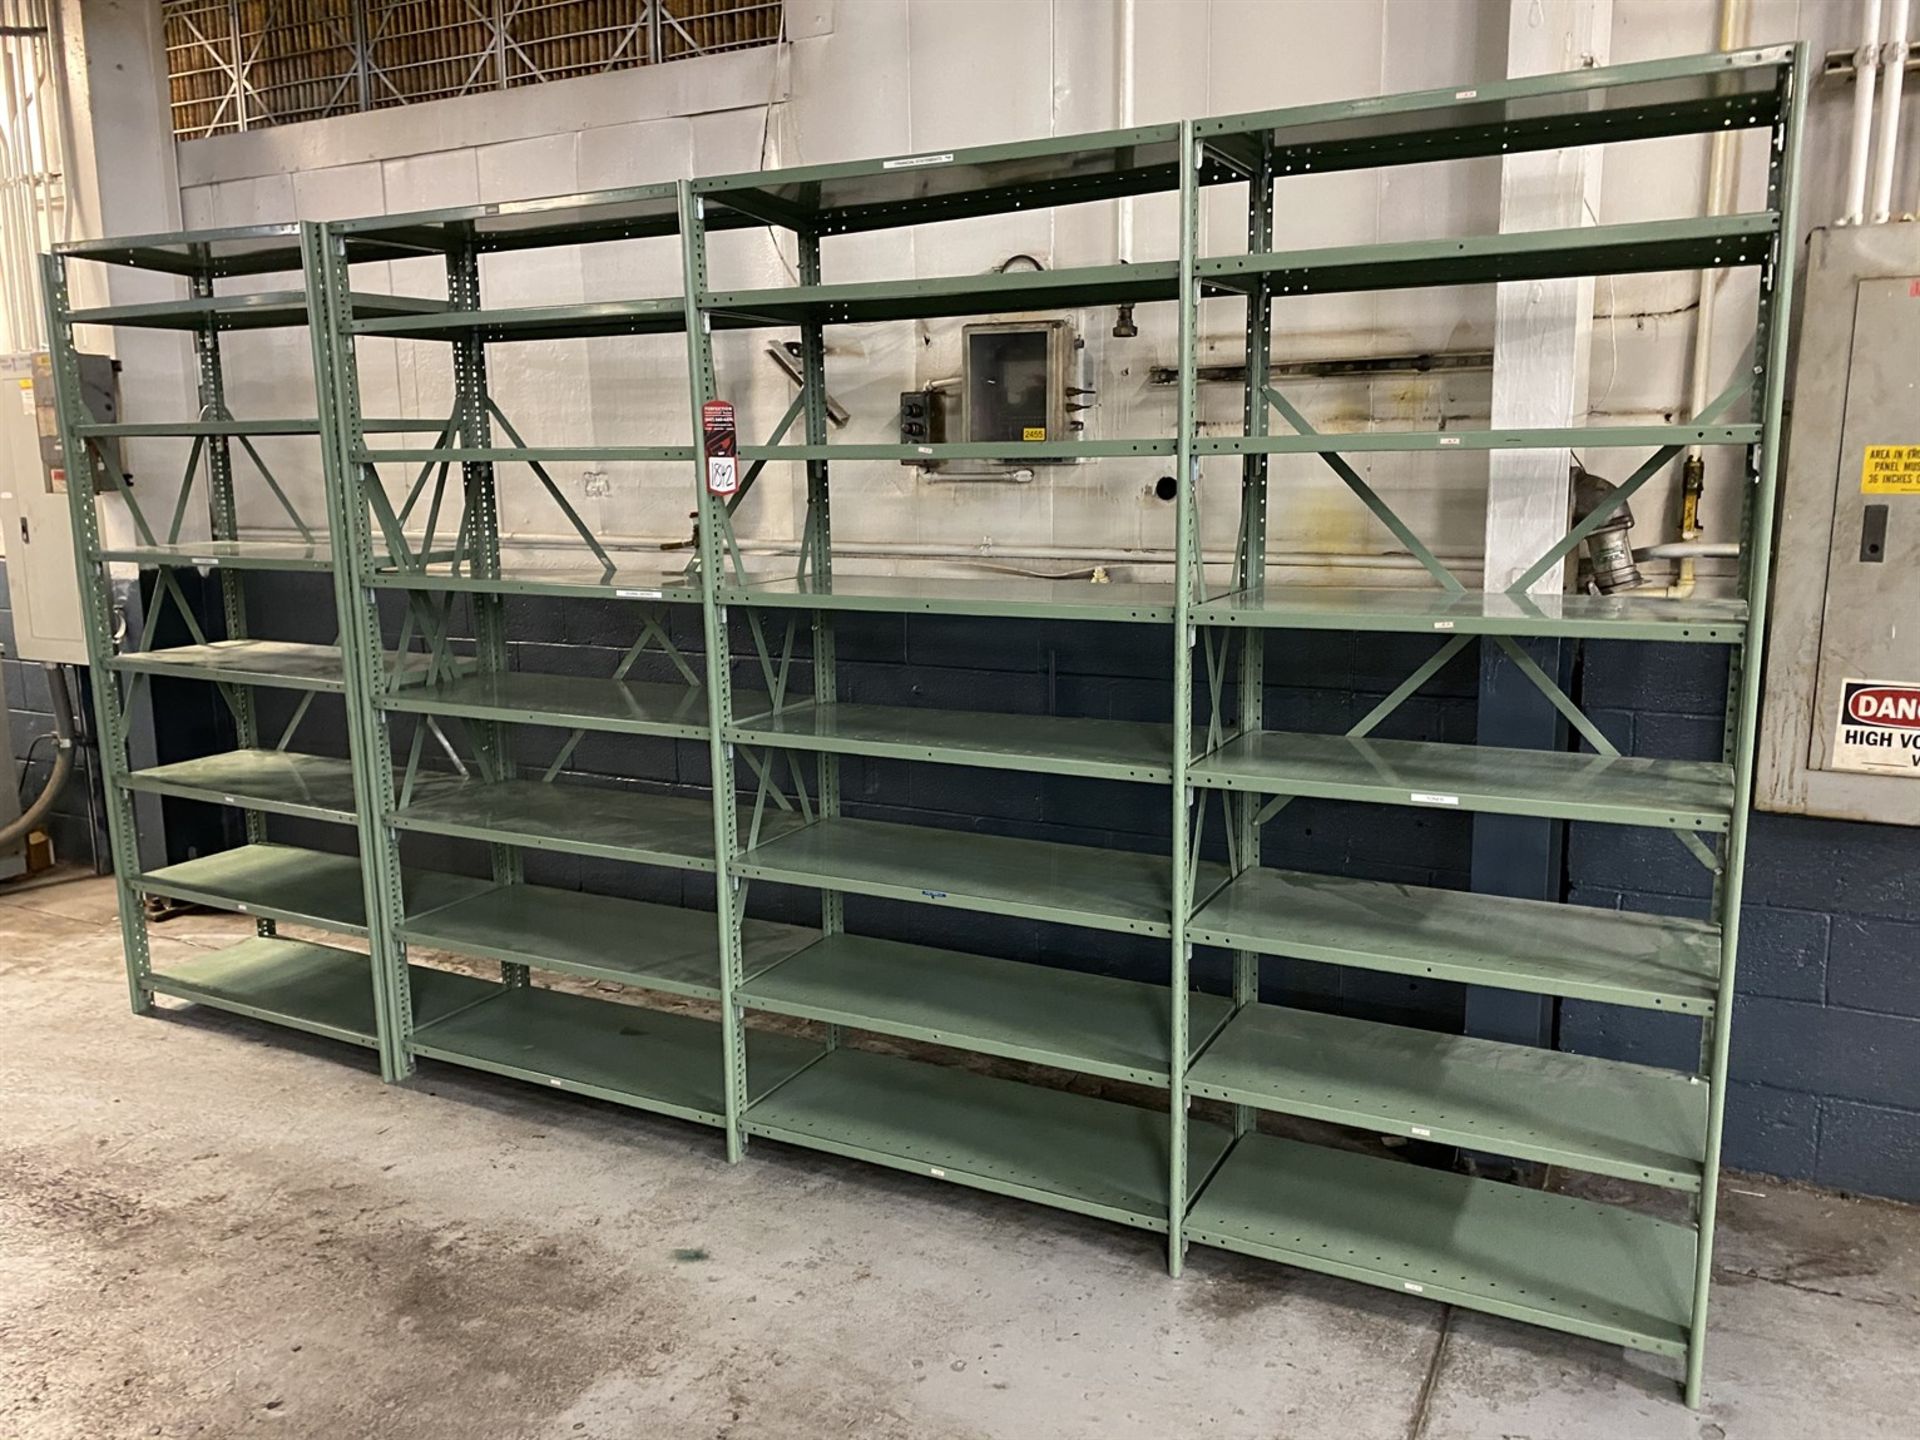 Lot of (6) Sections of Shop Shelving Units